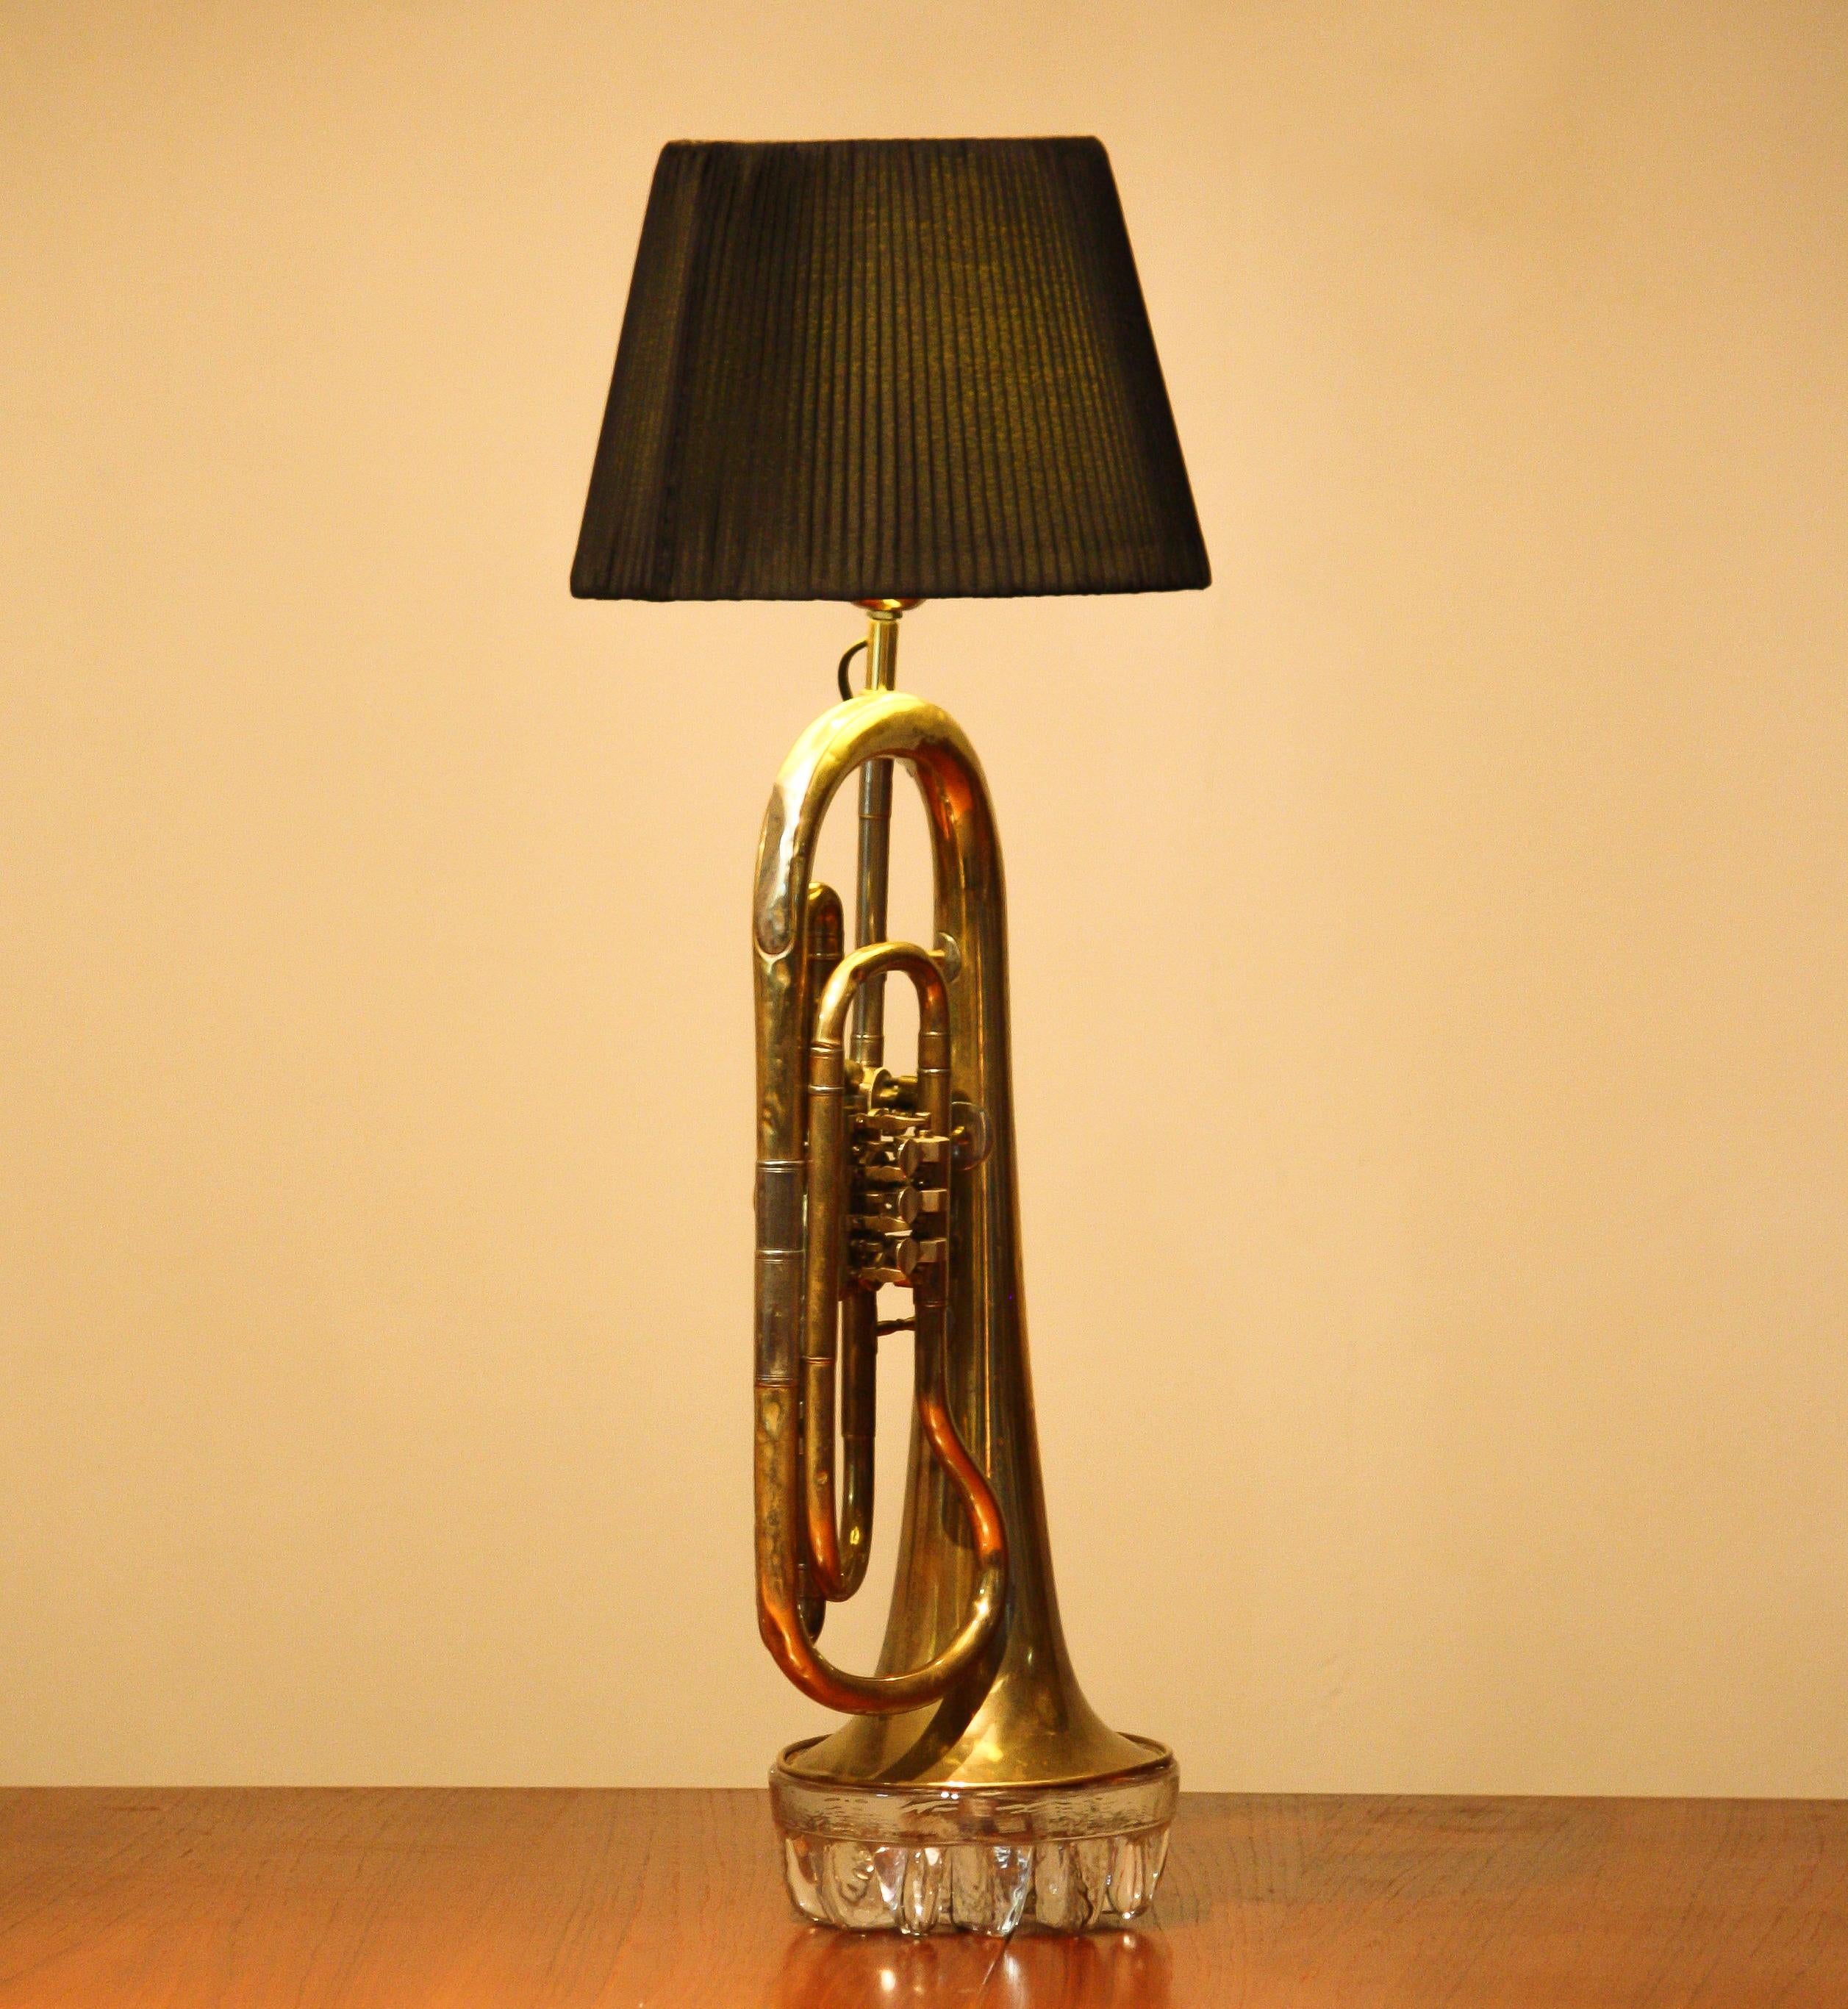 Central American Table Lamp Made of an American Cornet Flaps Trumpet from 1920s, Art Deco